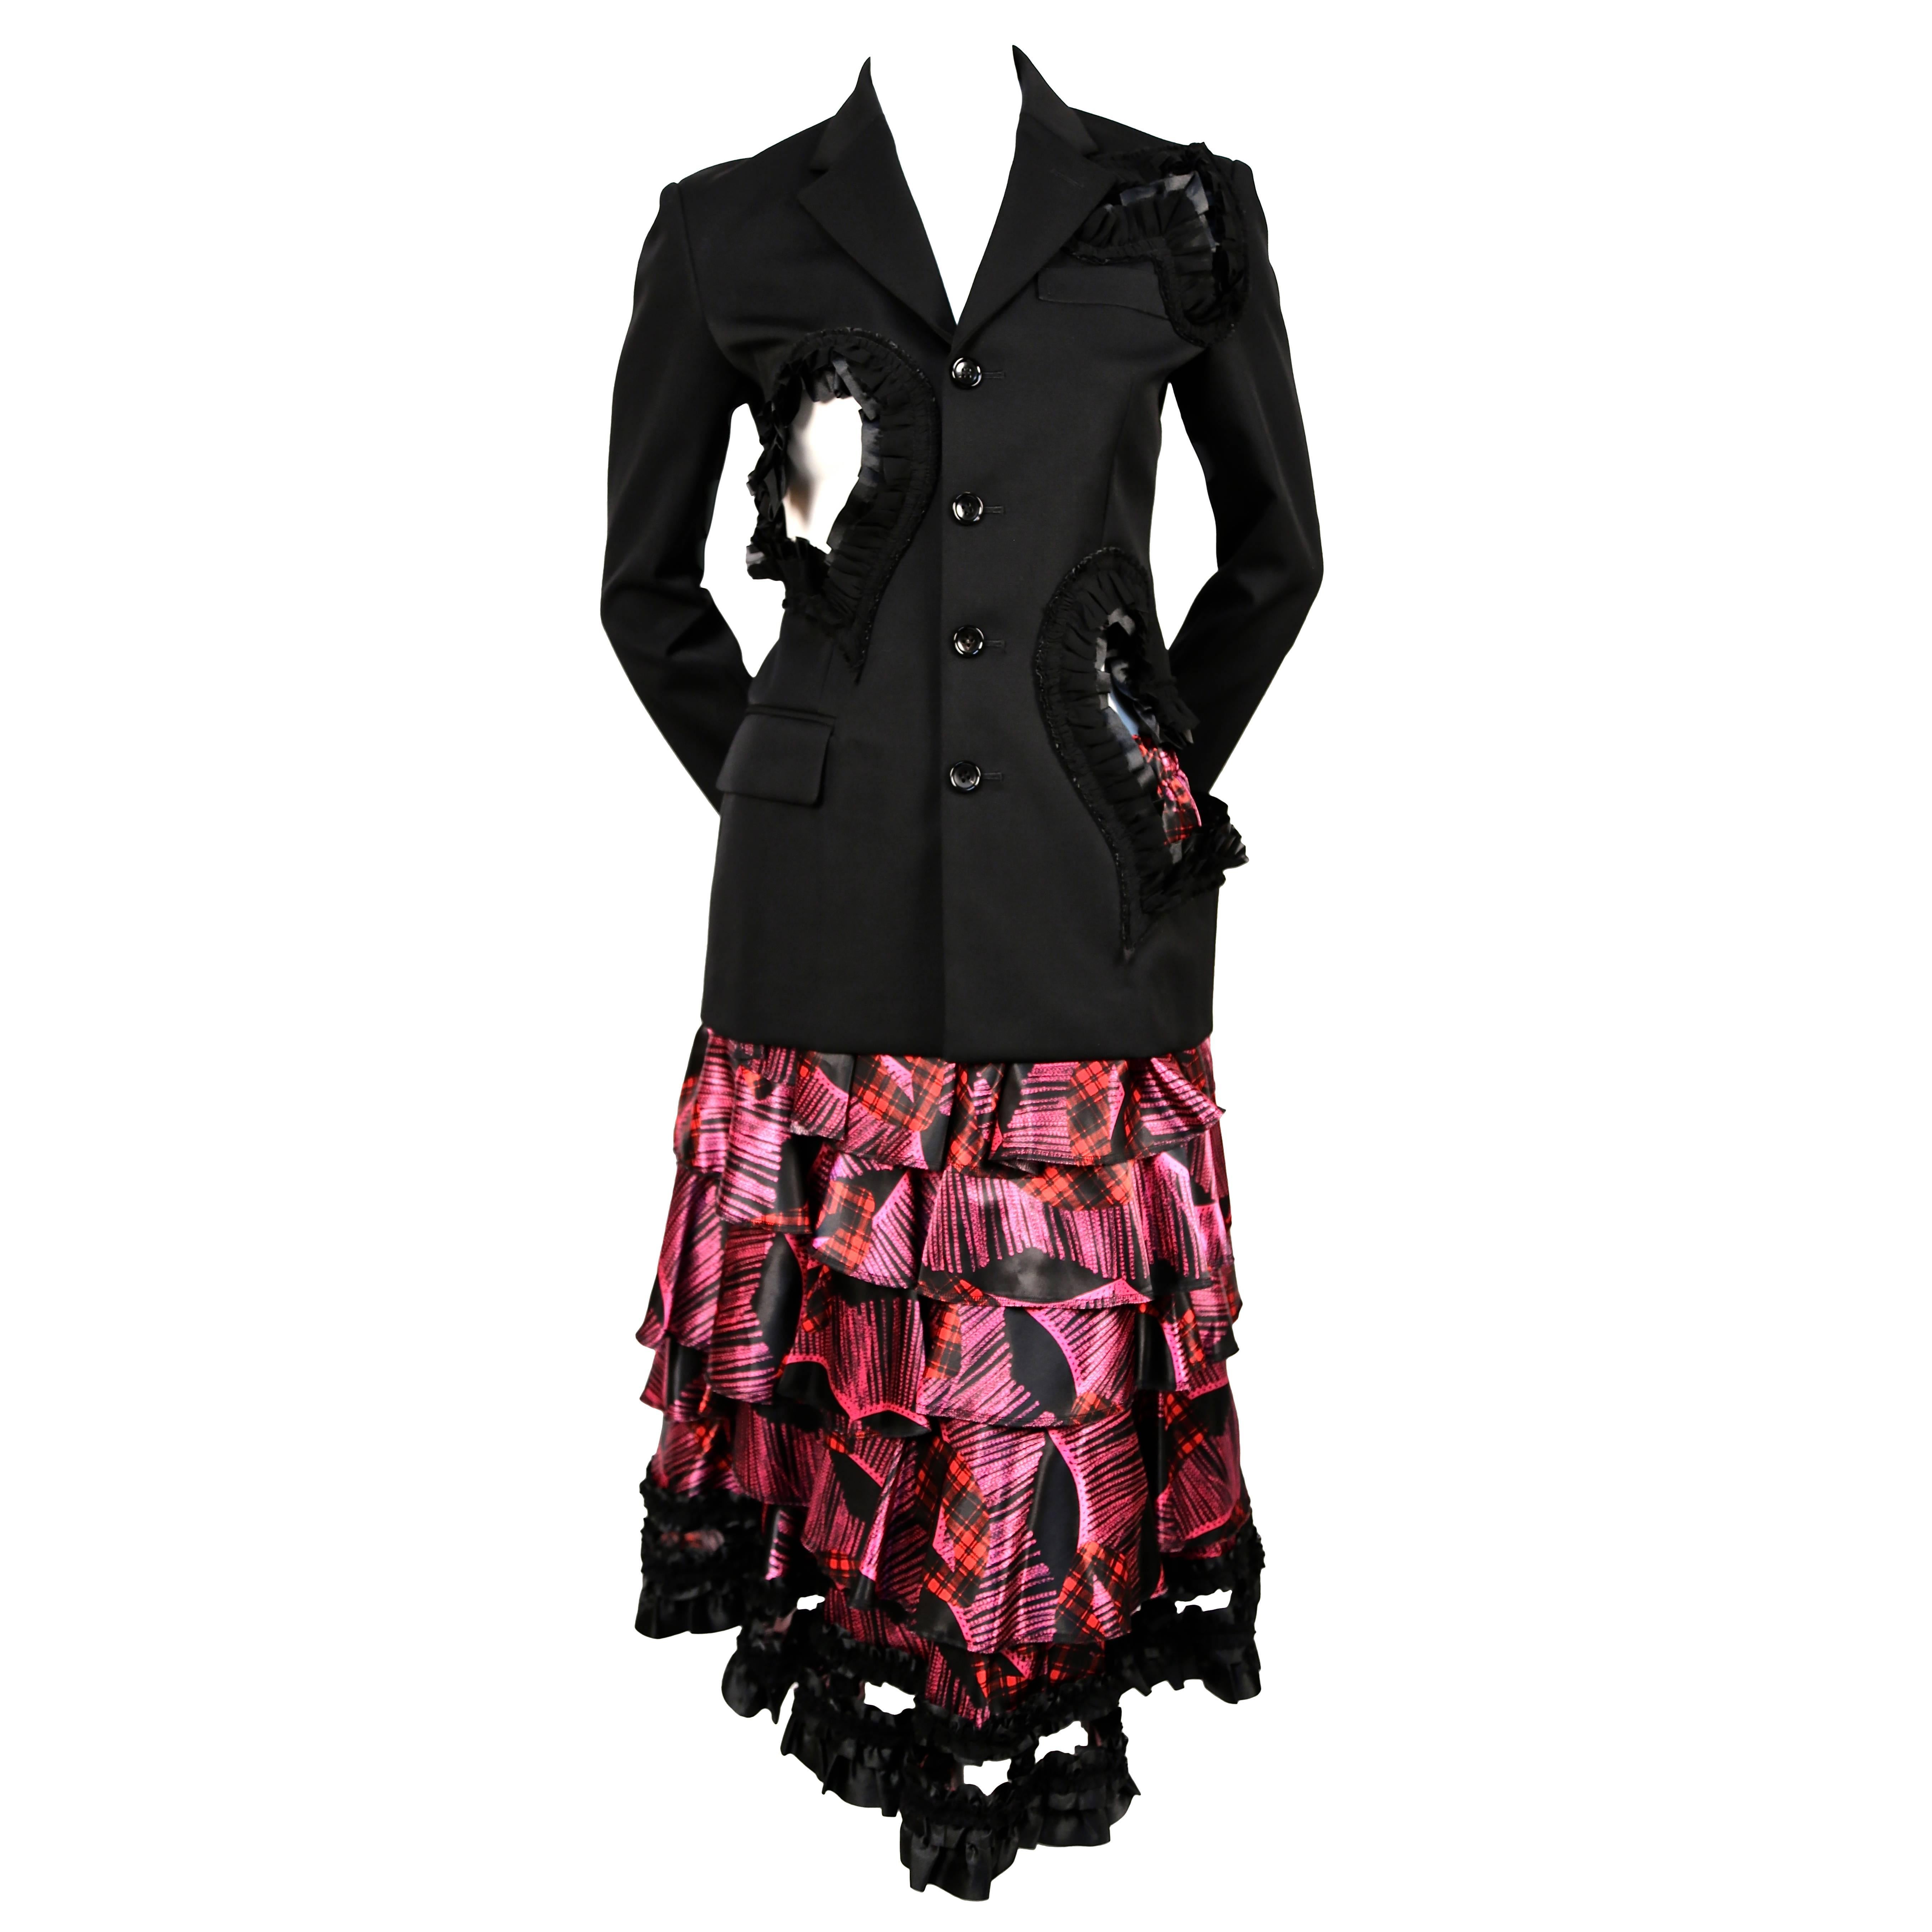 COMME DES GARCONS 'bad taste' runway blazer with open hearts and tiered skirt